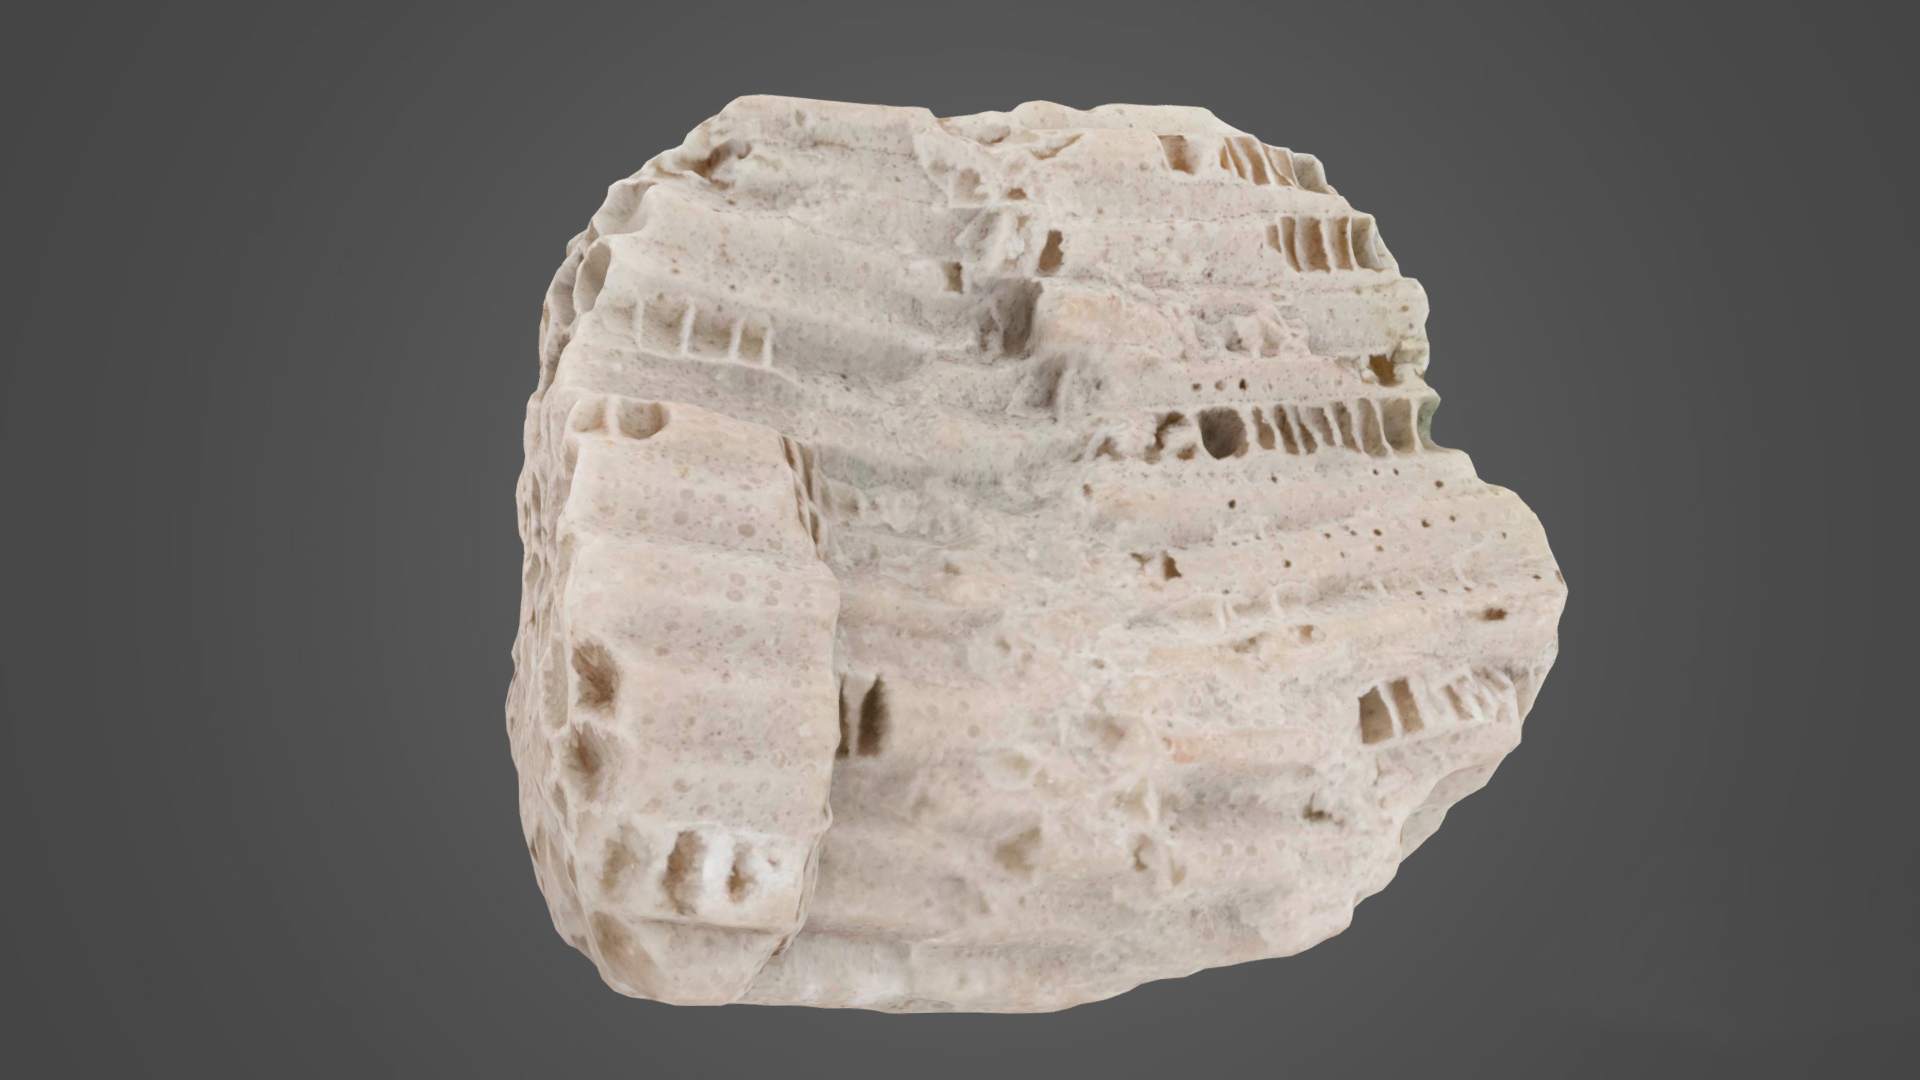 3D Scan of Tabulate Coral Mold Fossil